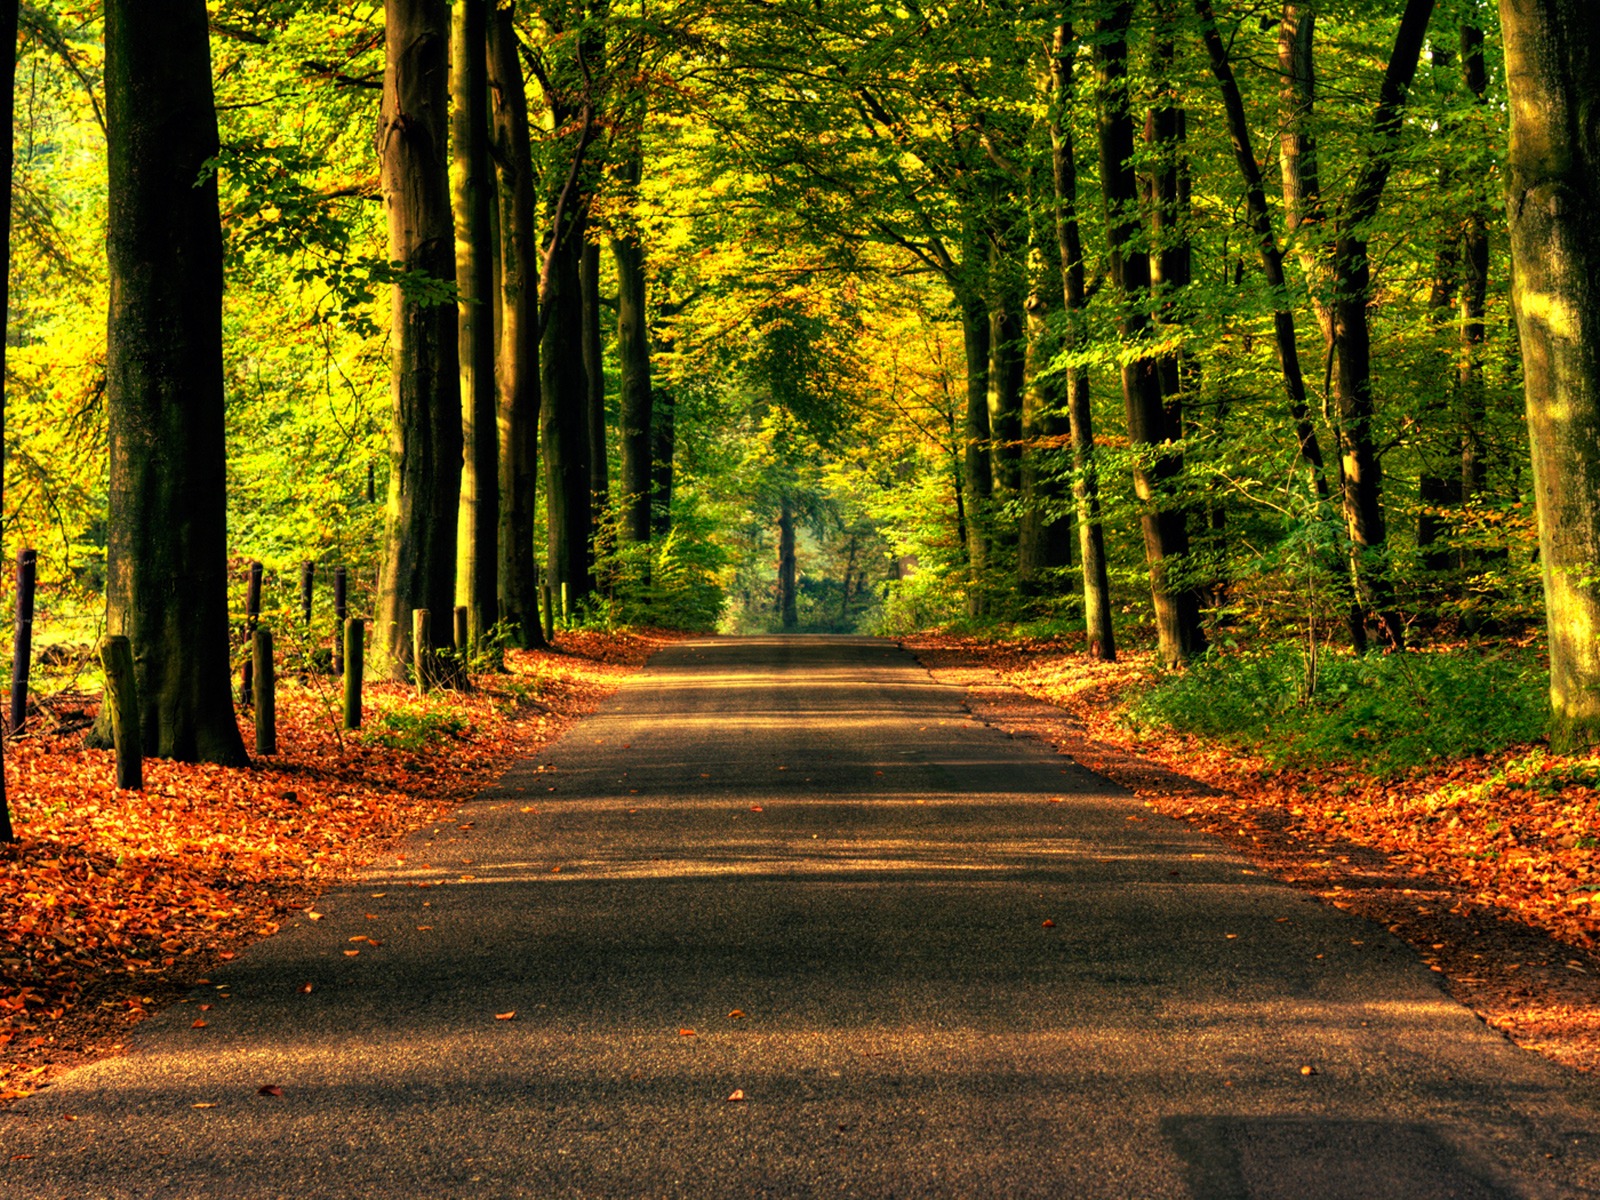 Road to Autumn Wallpaper Autumn Nature Wallpapers in jpg format for ...